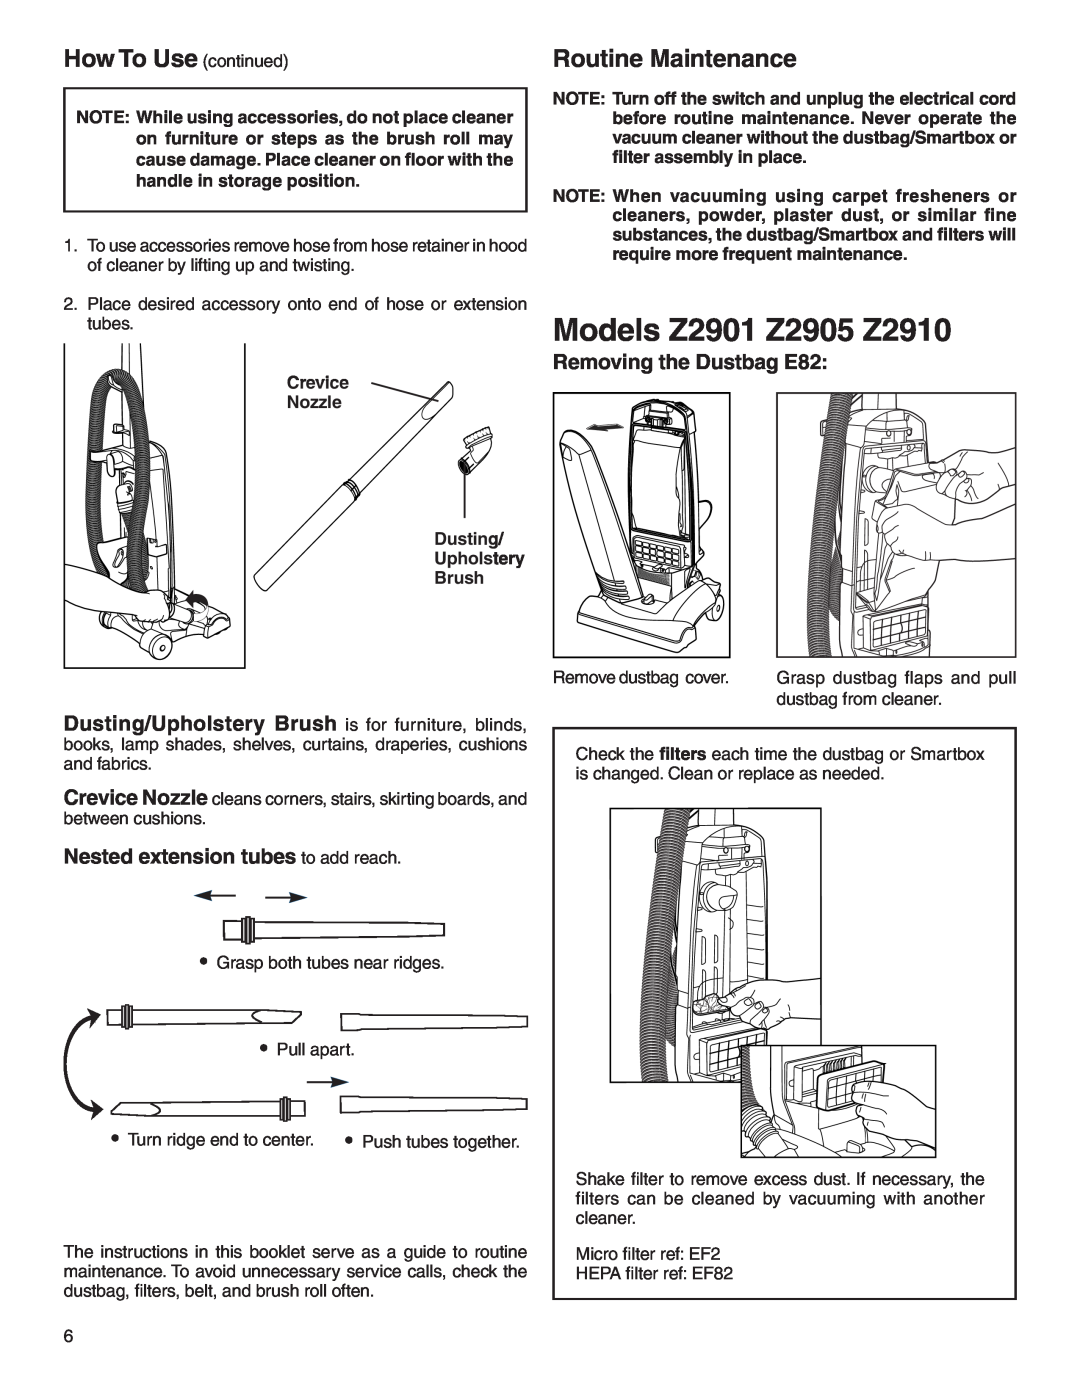 Electrolux Z2900 Series manual Models Z2901 Z2905 Z2910, How To Use continued, Nested extension tubes to add reach 